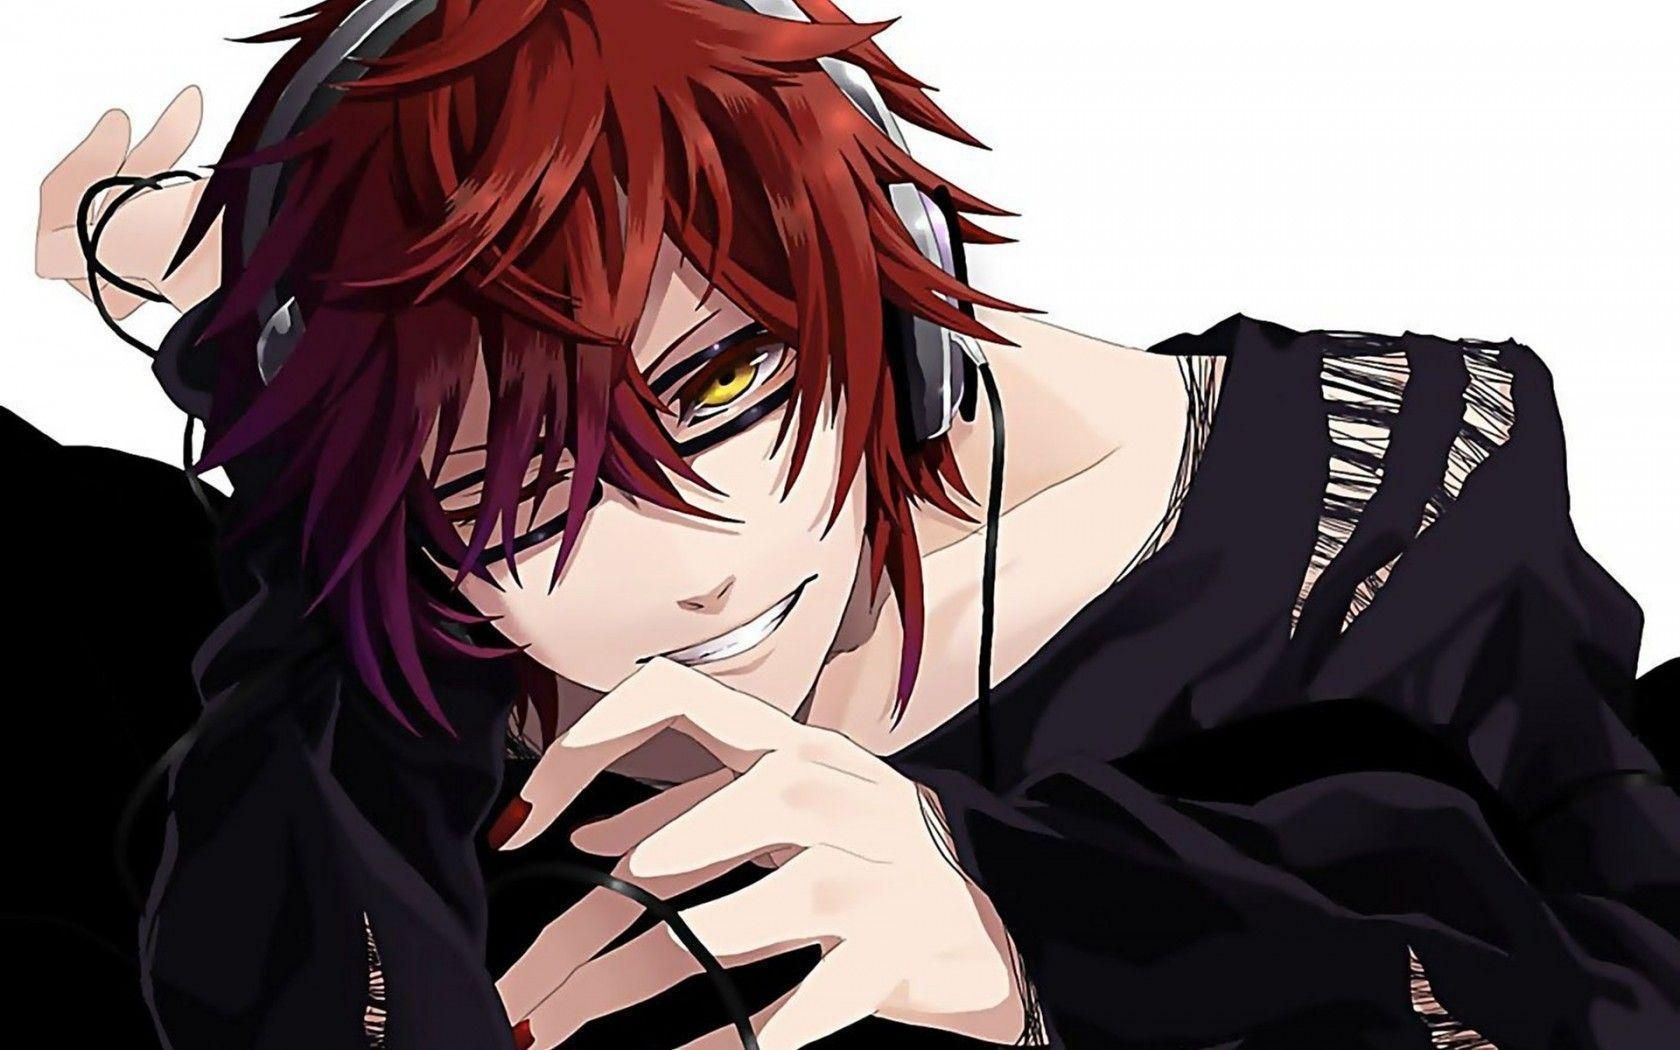 Anime Boy Wallpaper For Android Anime Guy Wallpaper Anime Boy Wallpaper Free By Zedge. Red hair anime guy, Anime guys with glasses, Anime guys